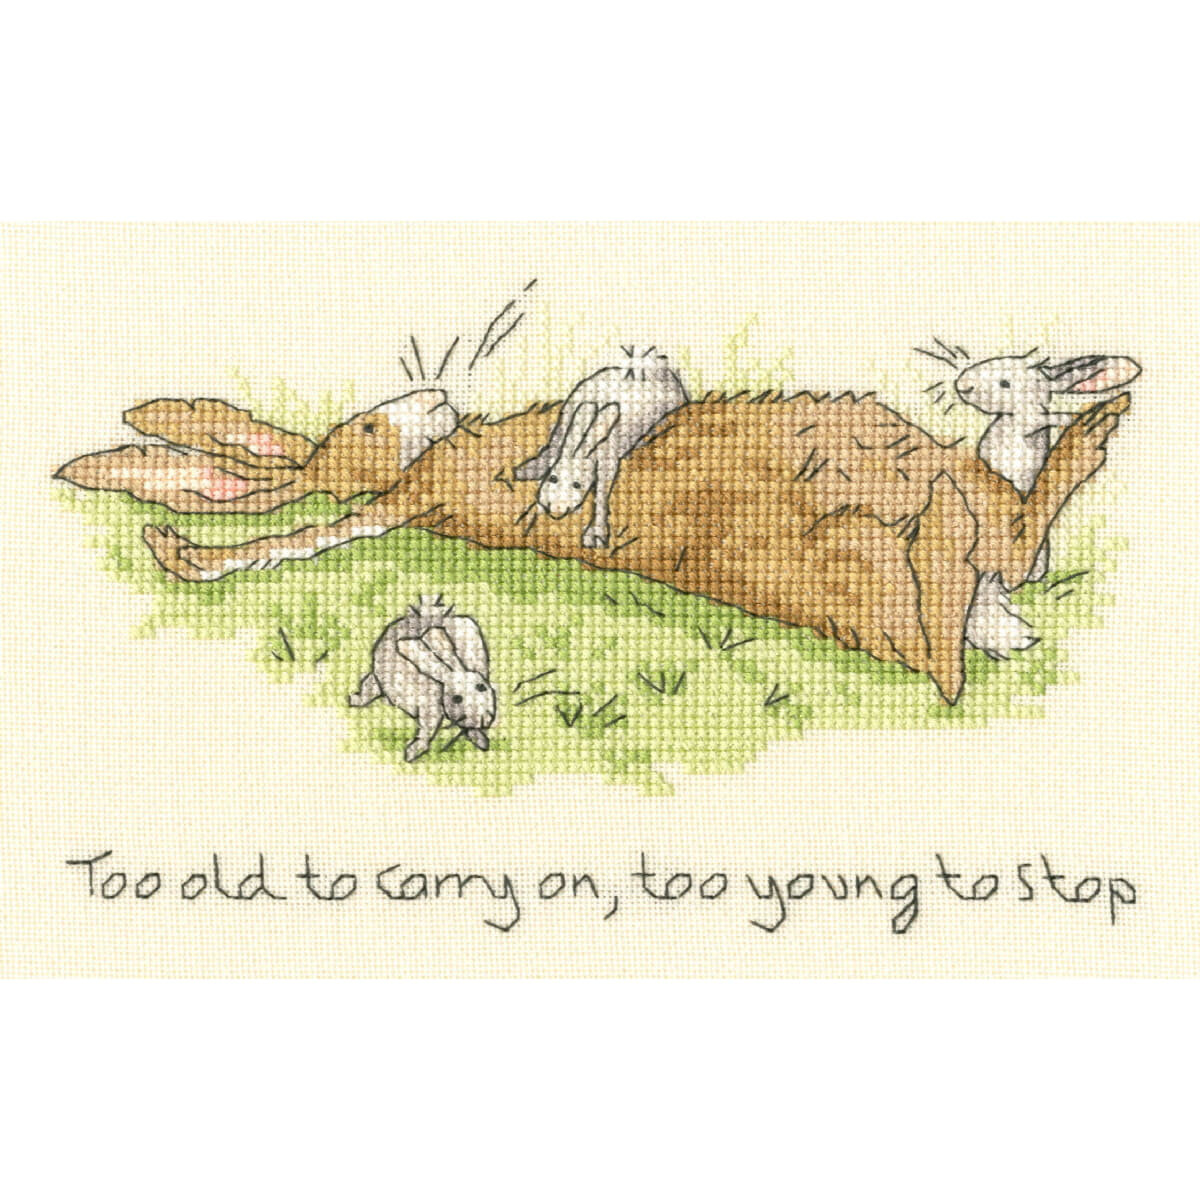 Cartoon-like drawing of an old brown rabbit lying on its...